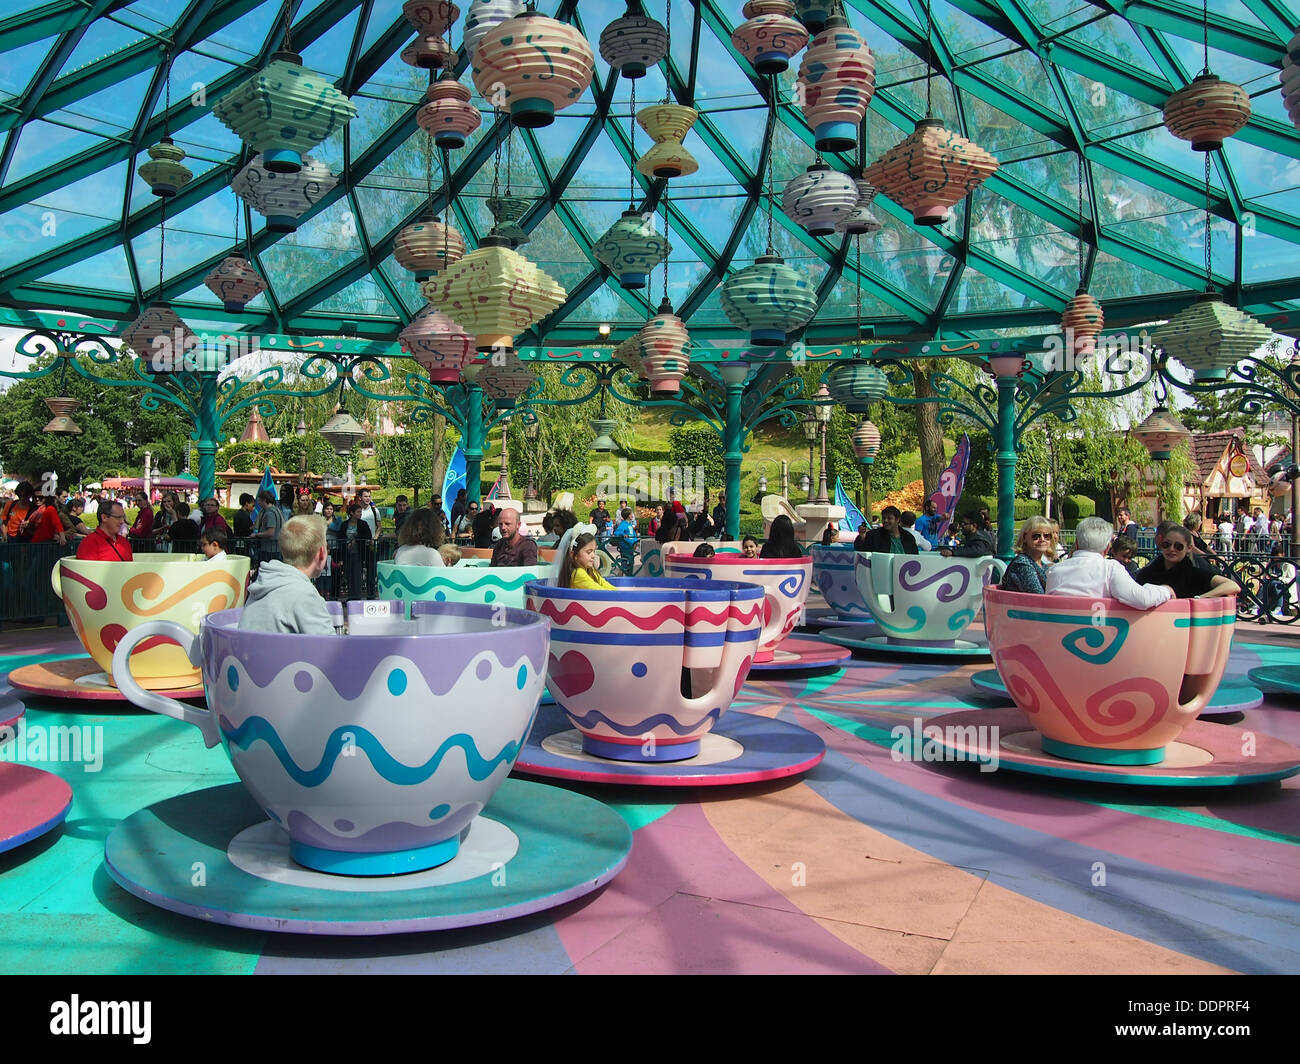 The Mad hatters tea cup ride at Disneyland Paris Stock Photo - Alamy